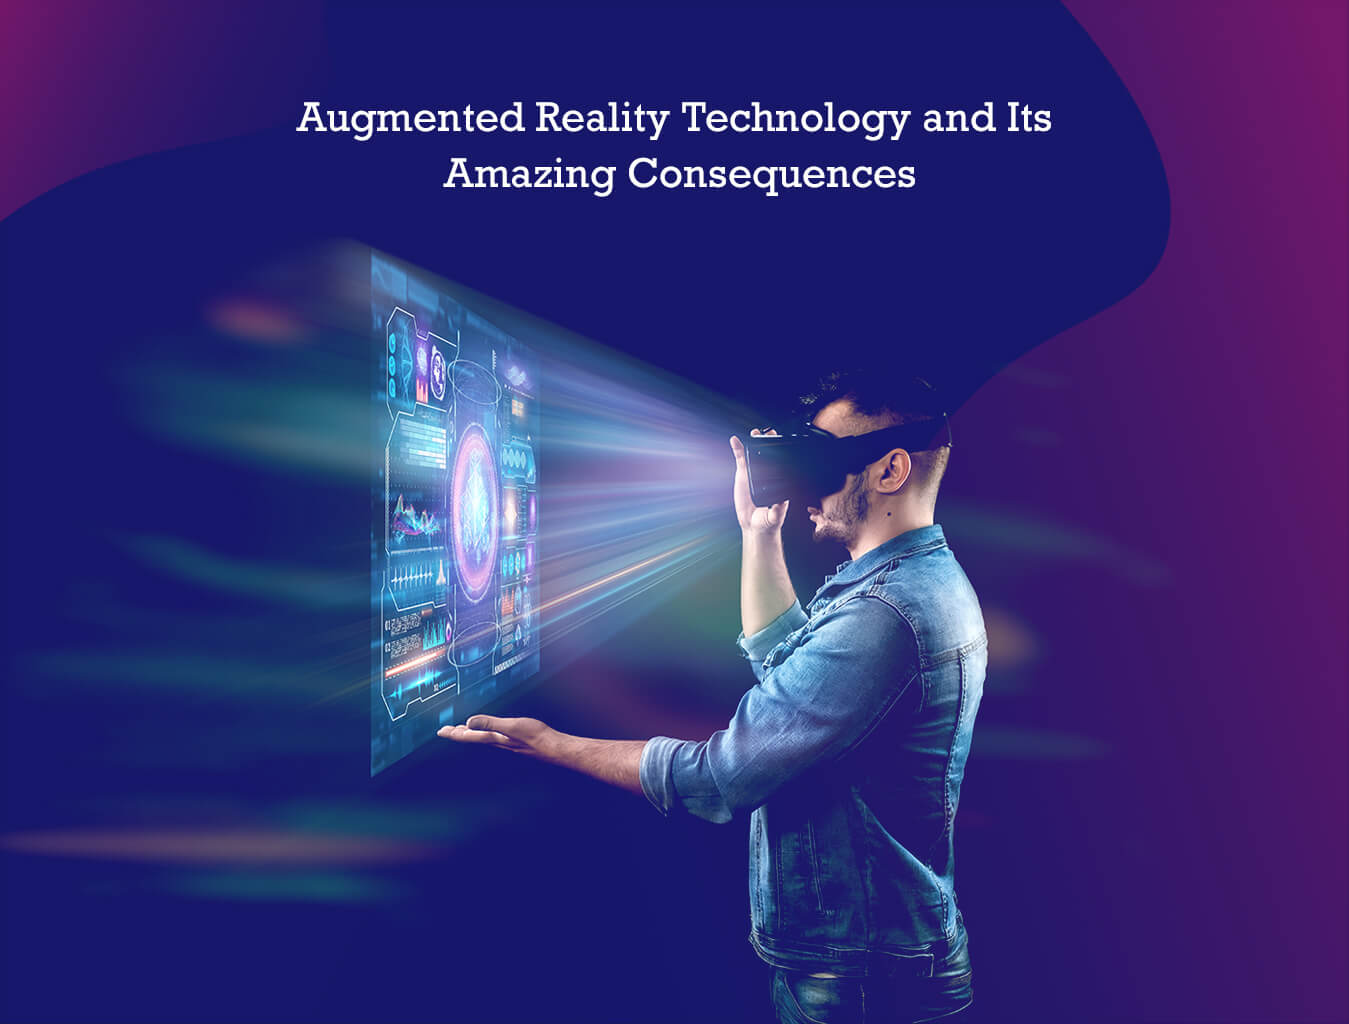 Augmented Reality Technology and its Potential Consequences